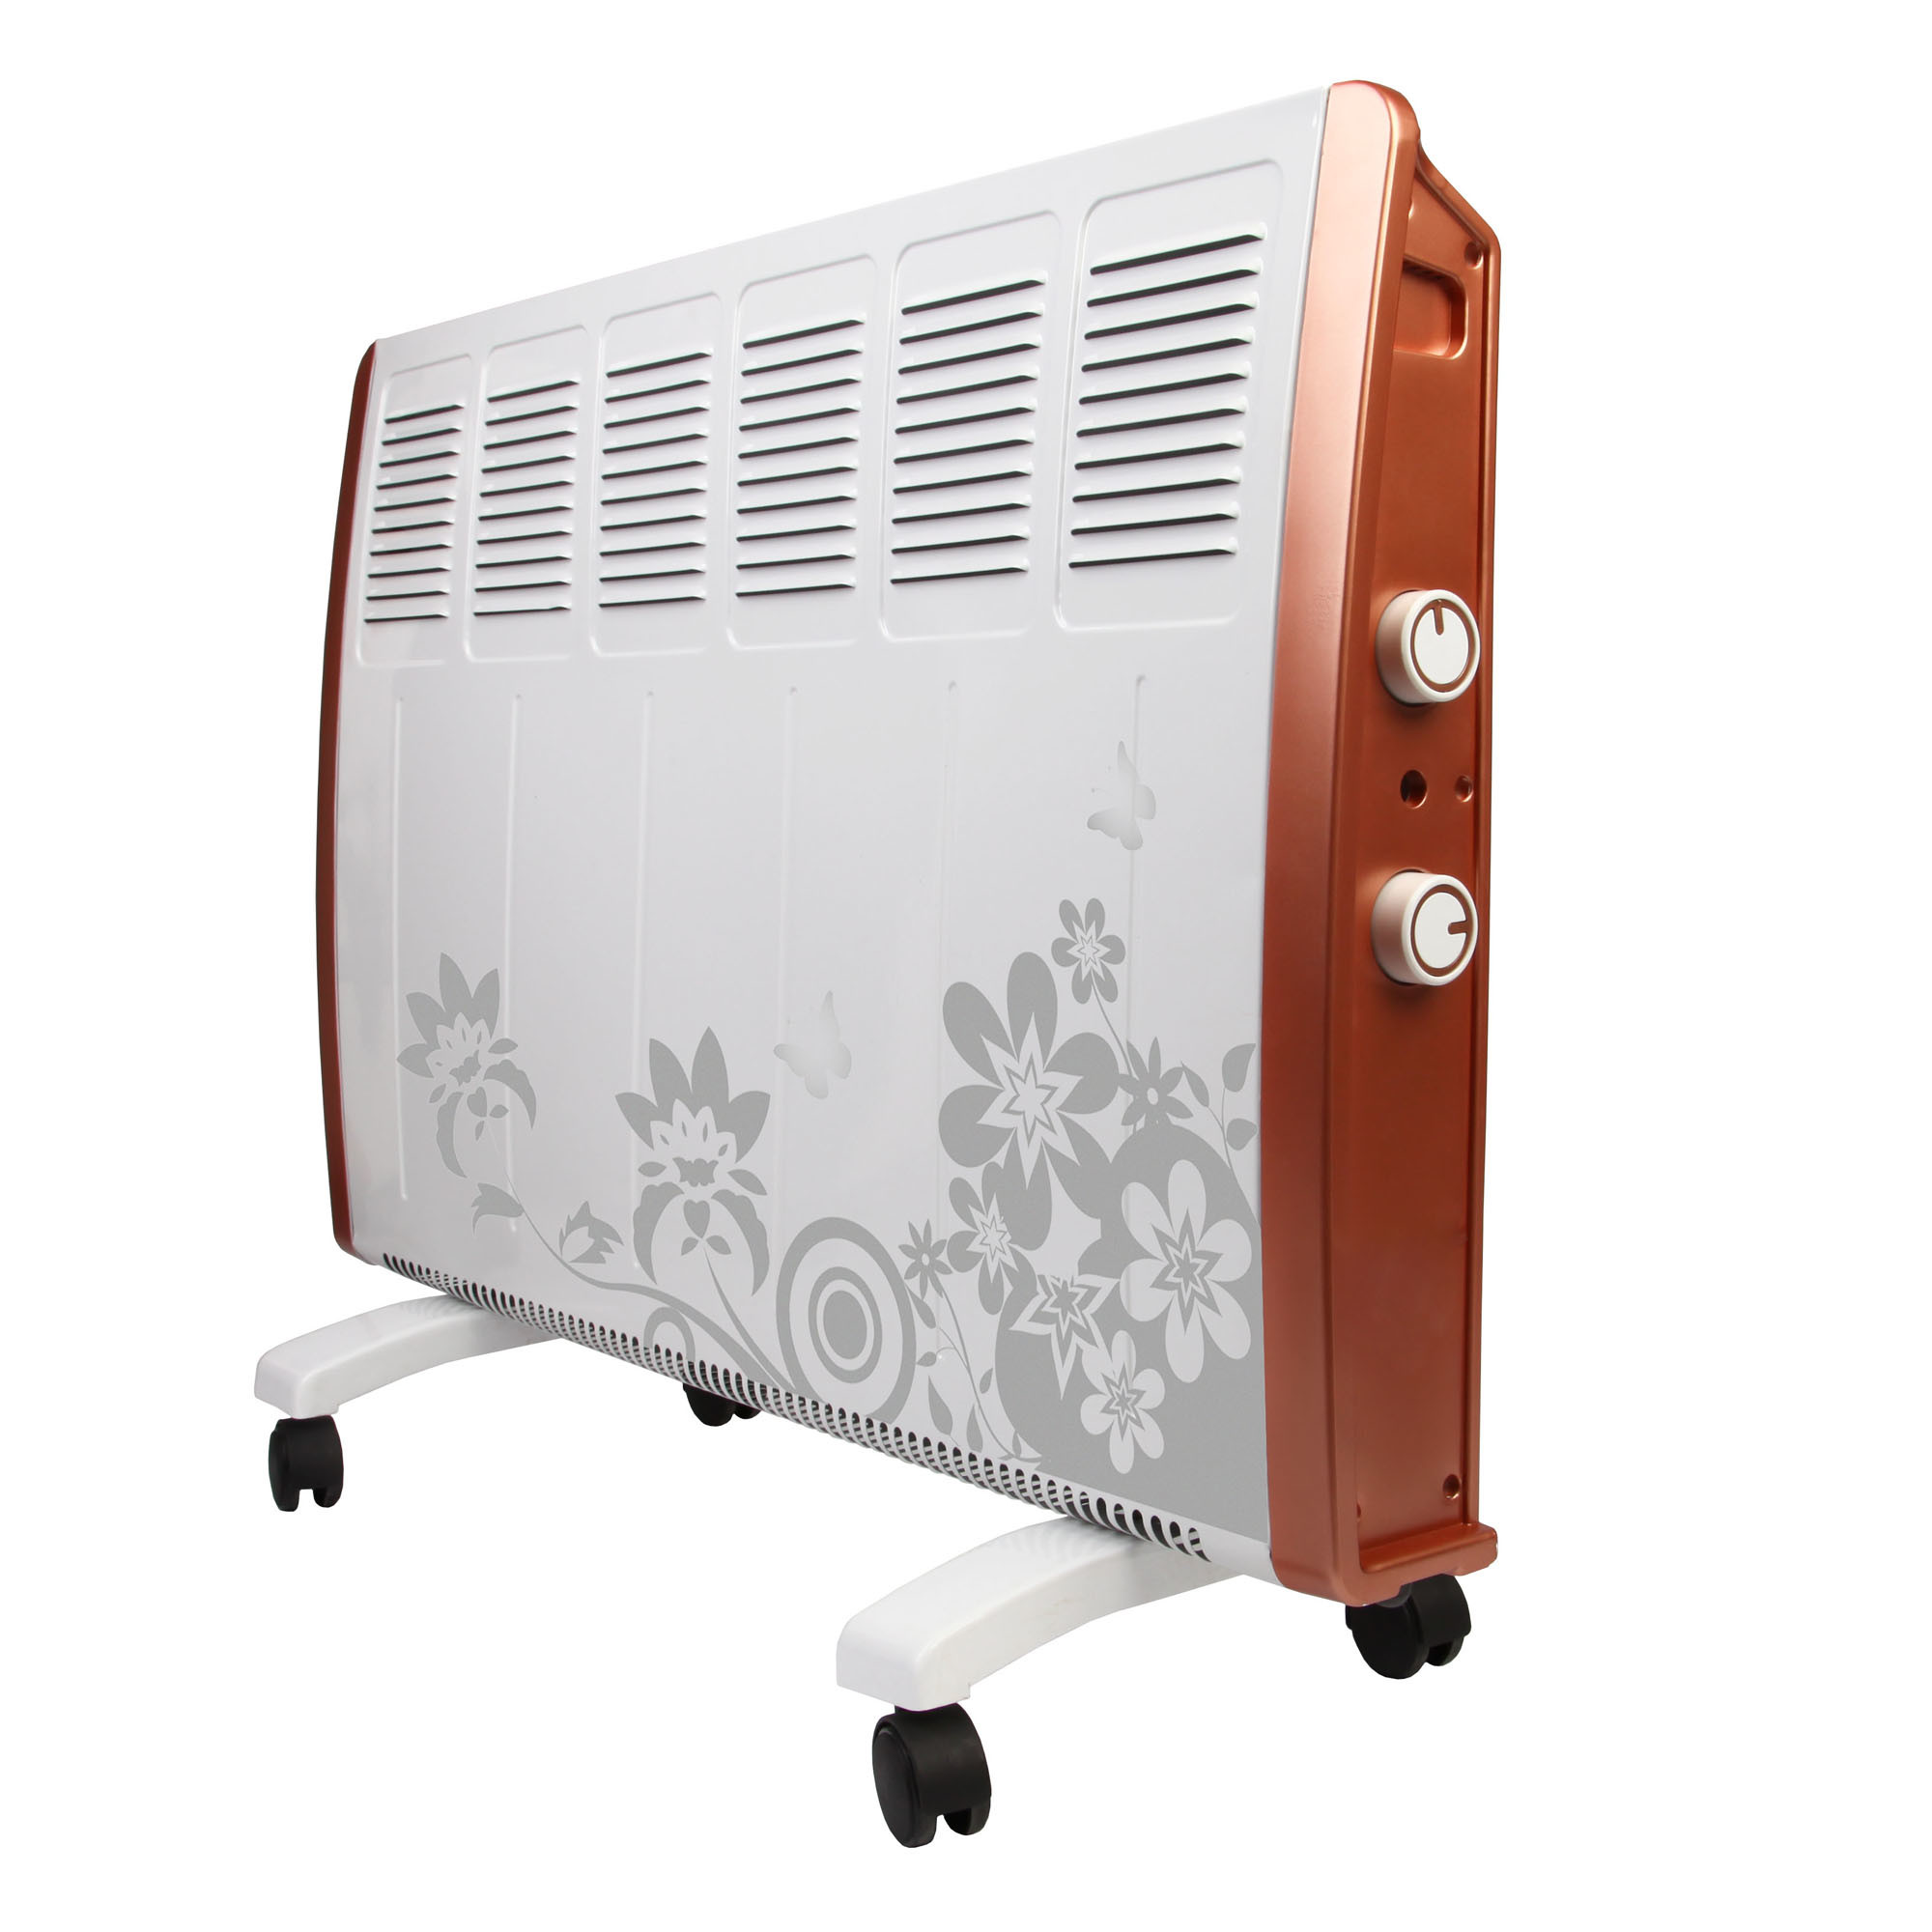 2000W Convector Heater with Thermostat and Casters